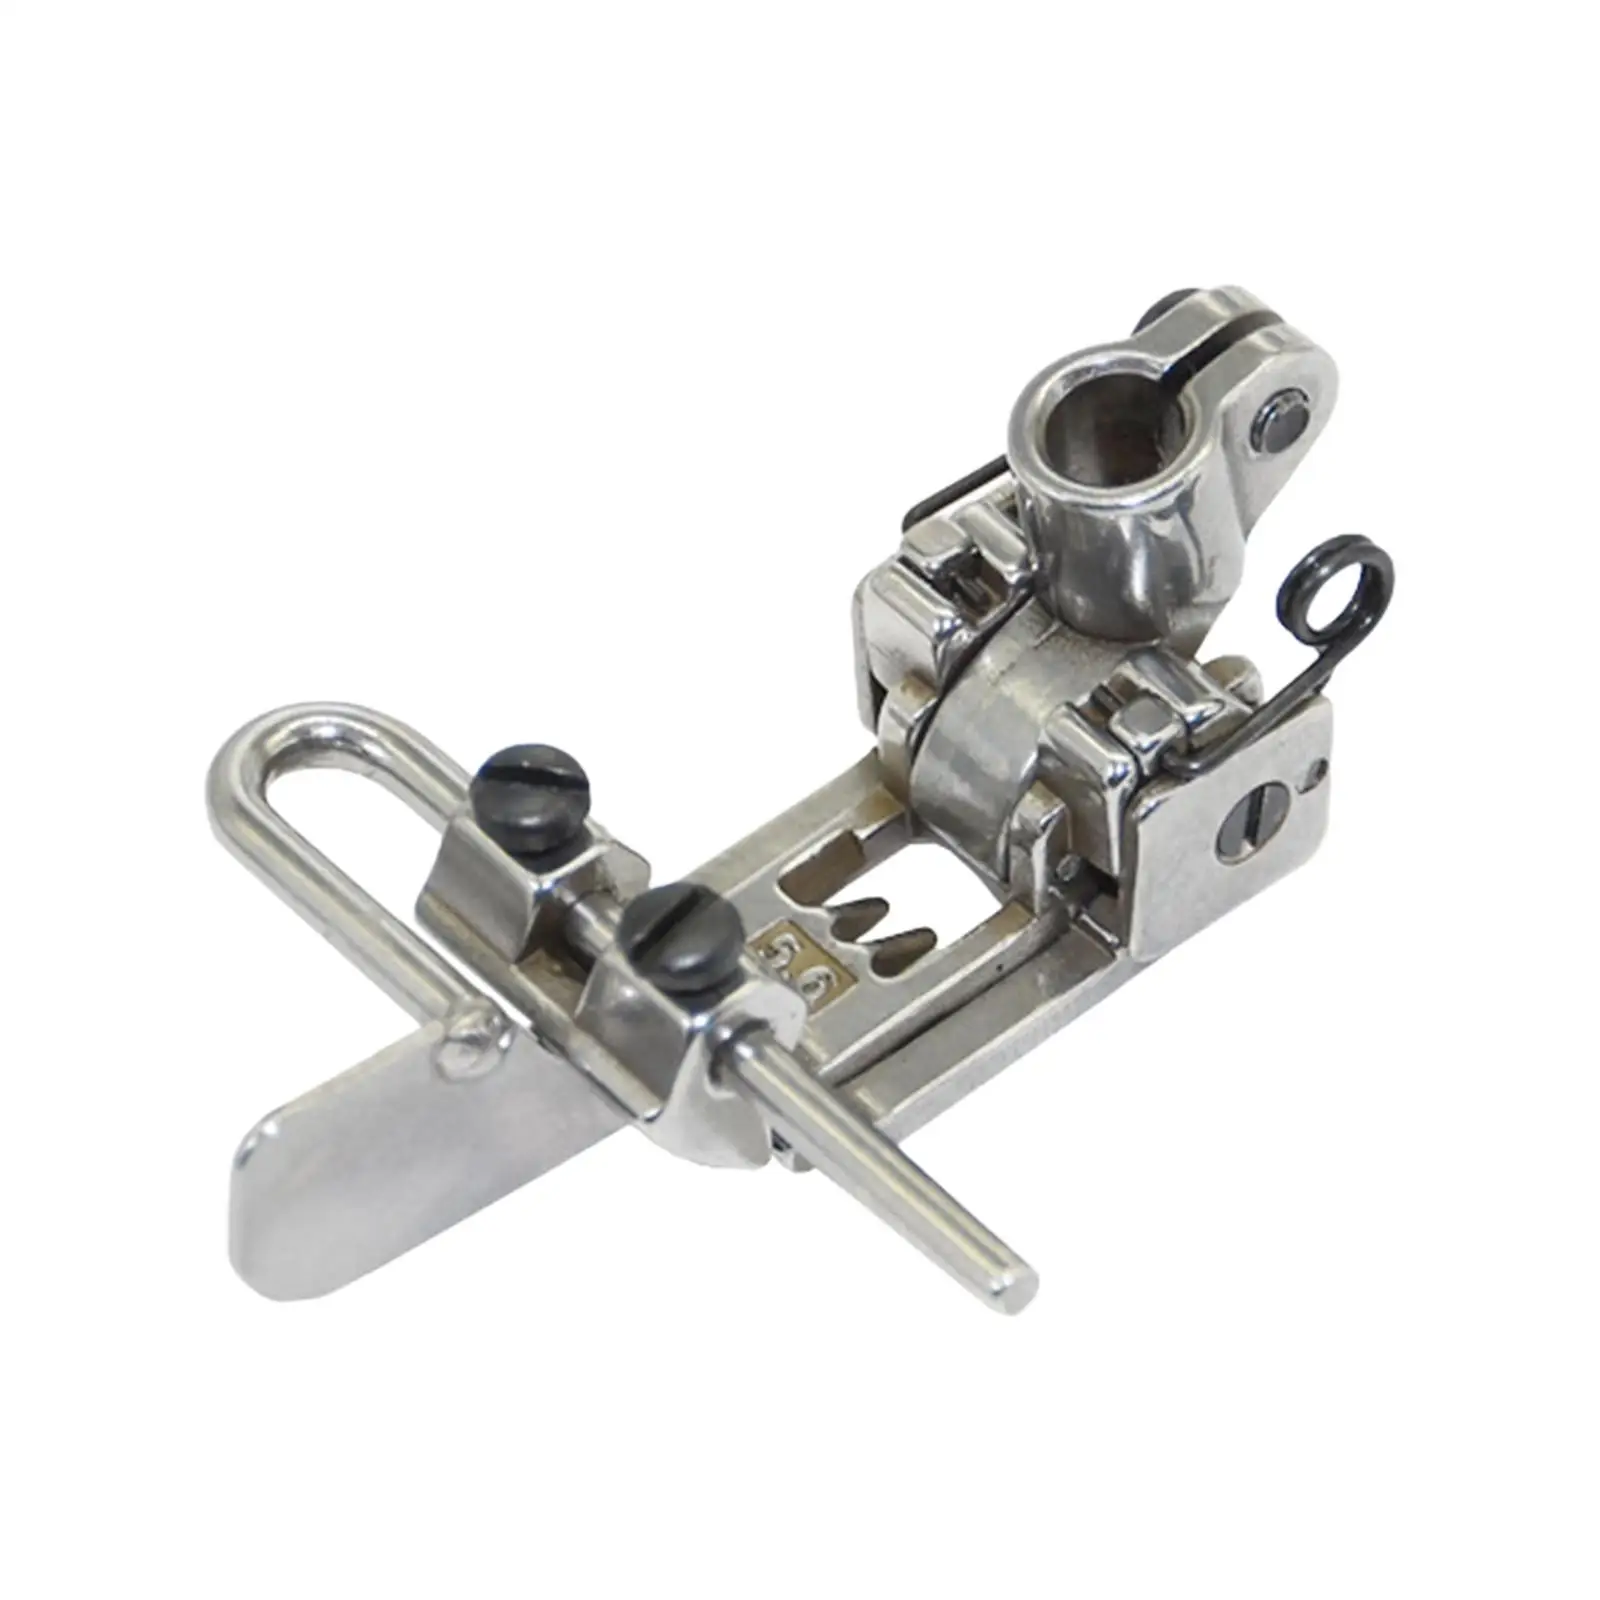 Sewing Machine Presser Foot Multipurpose Quilting Patchwork Presser Foot for Overlock Stitching Sewing Apparel DIY Crafts